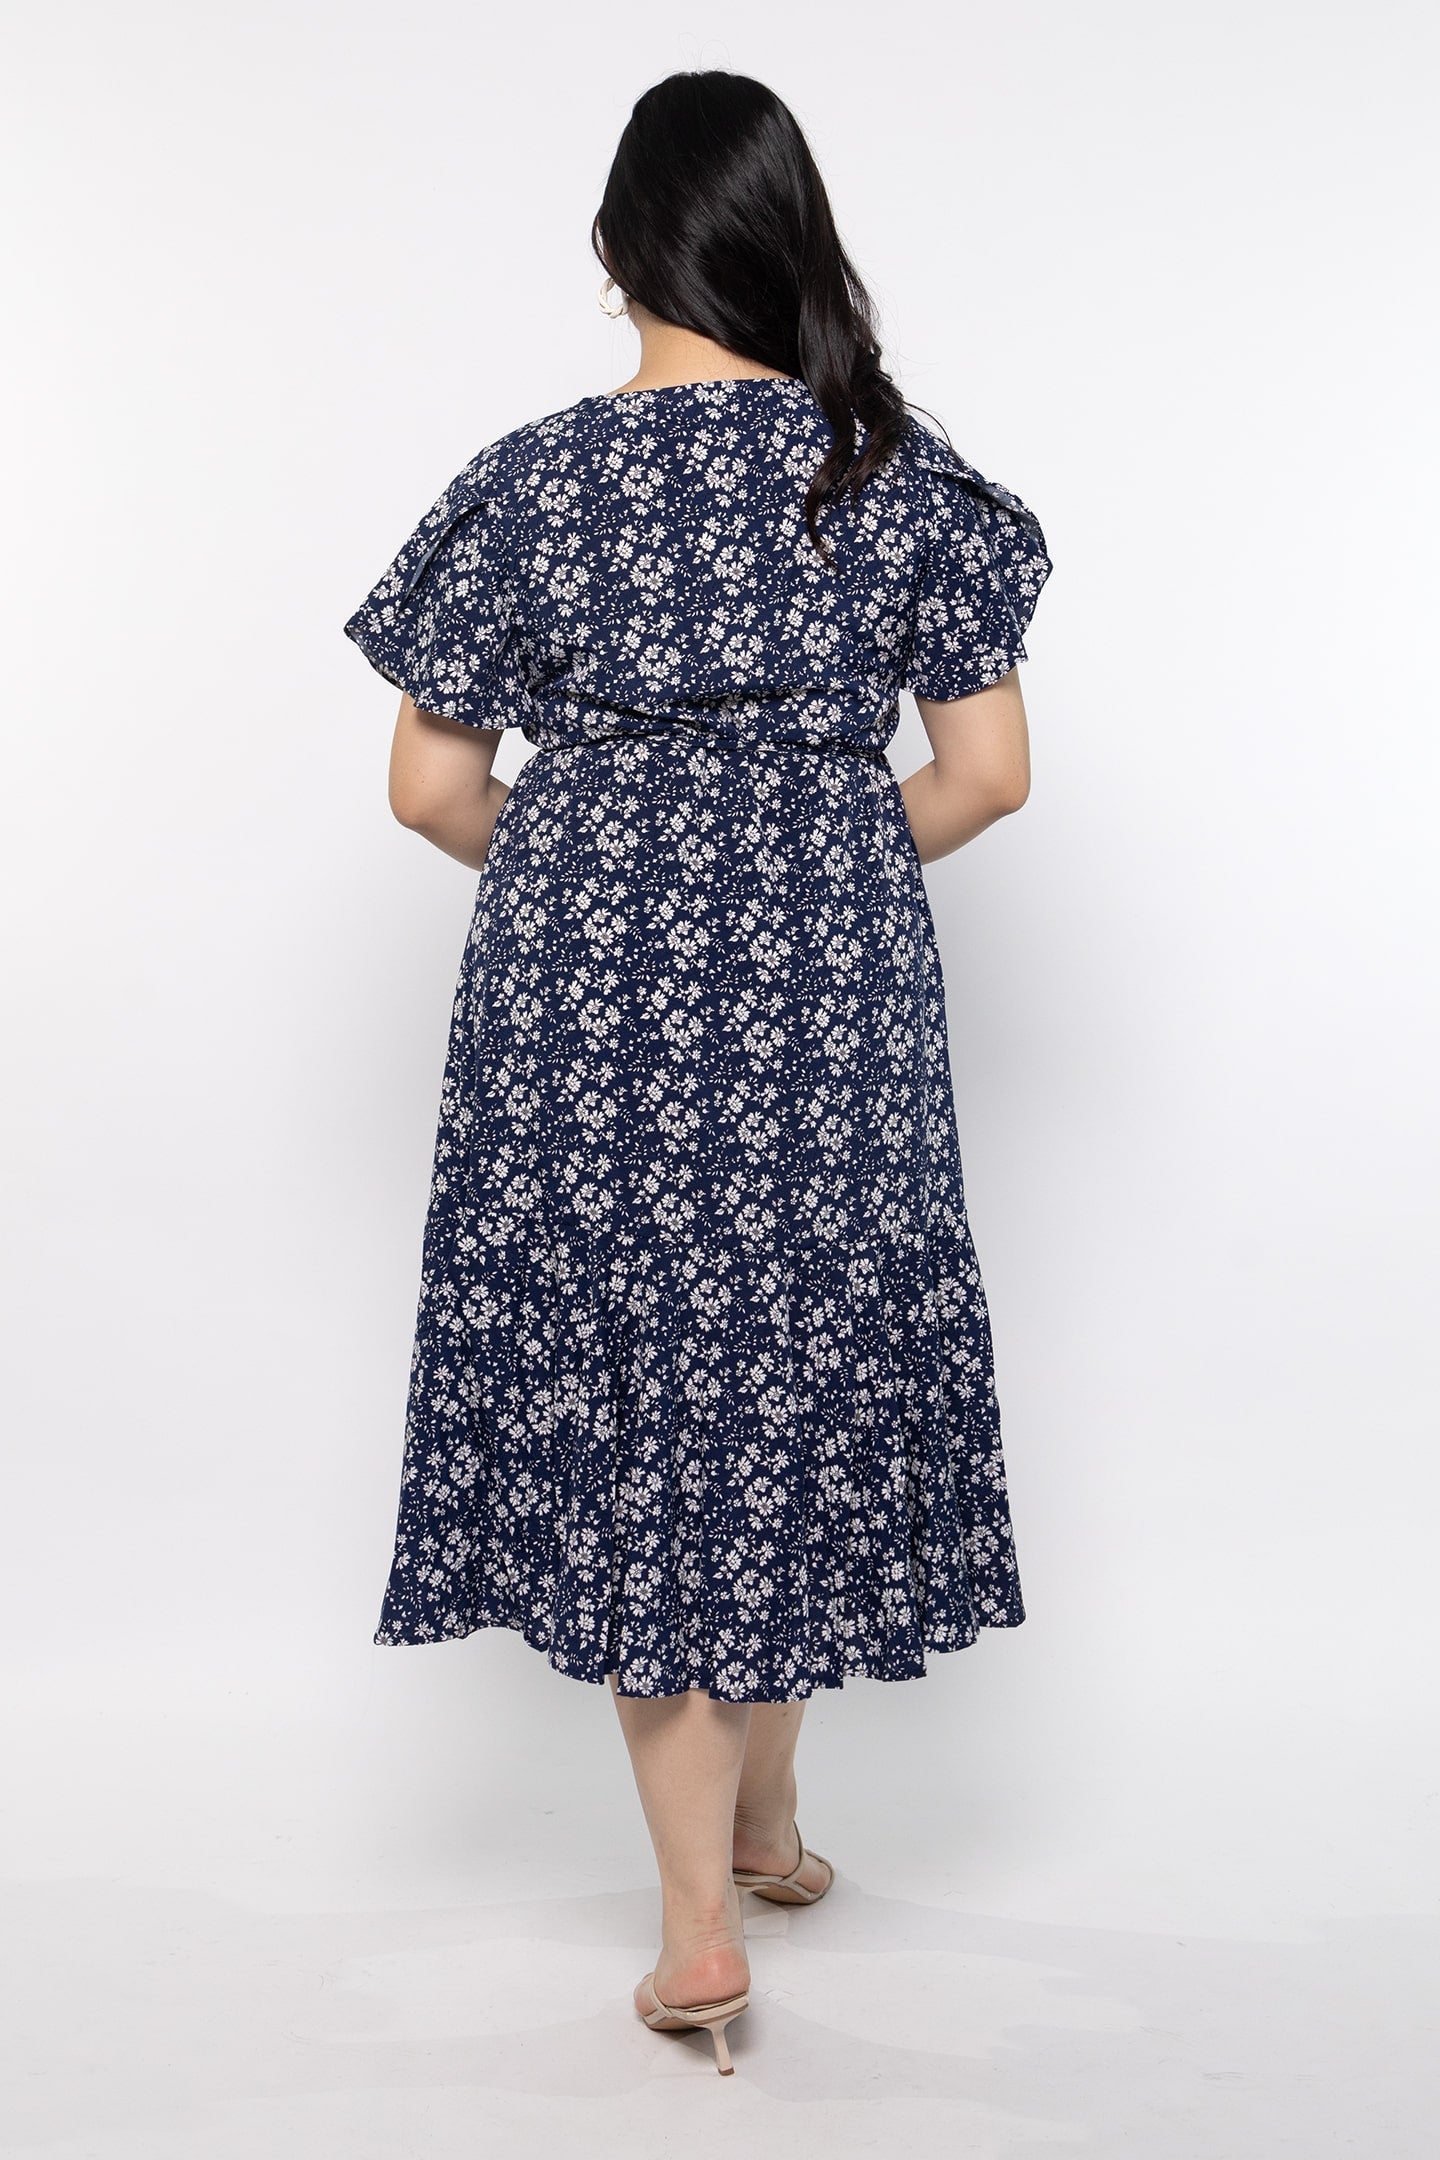 Ginnie Dress in Cheery Blooms